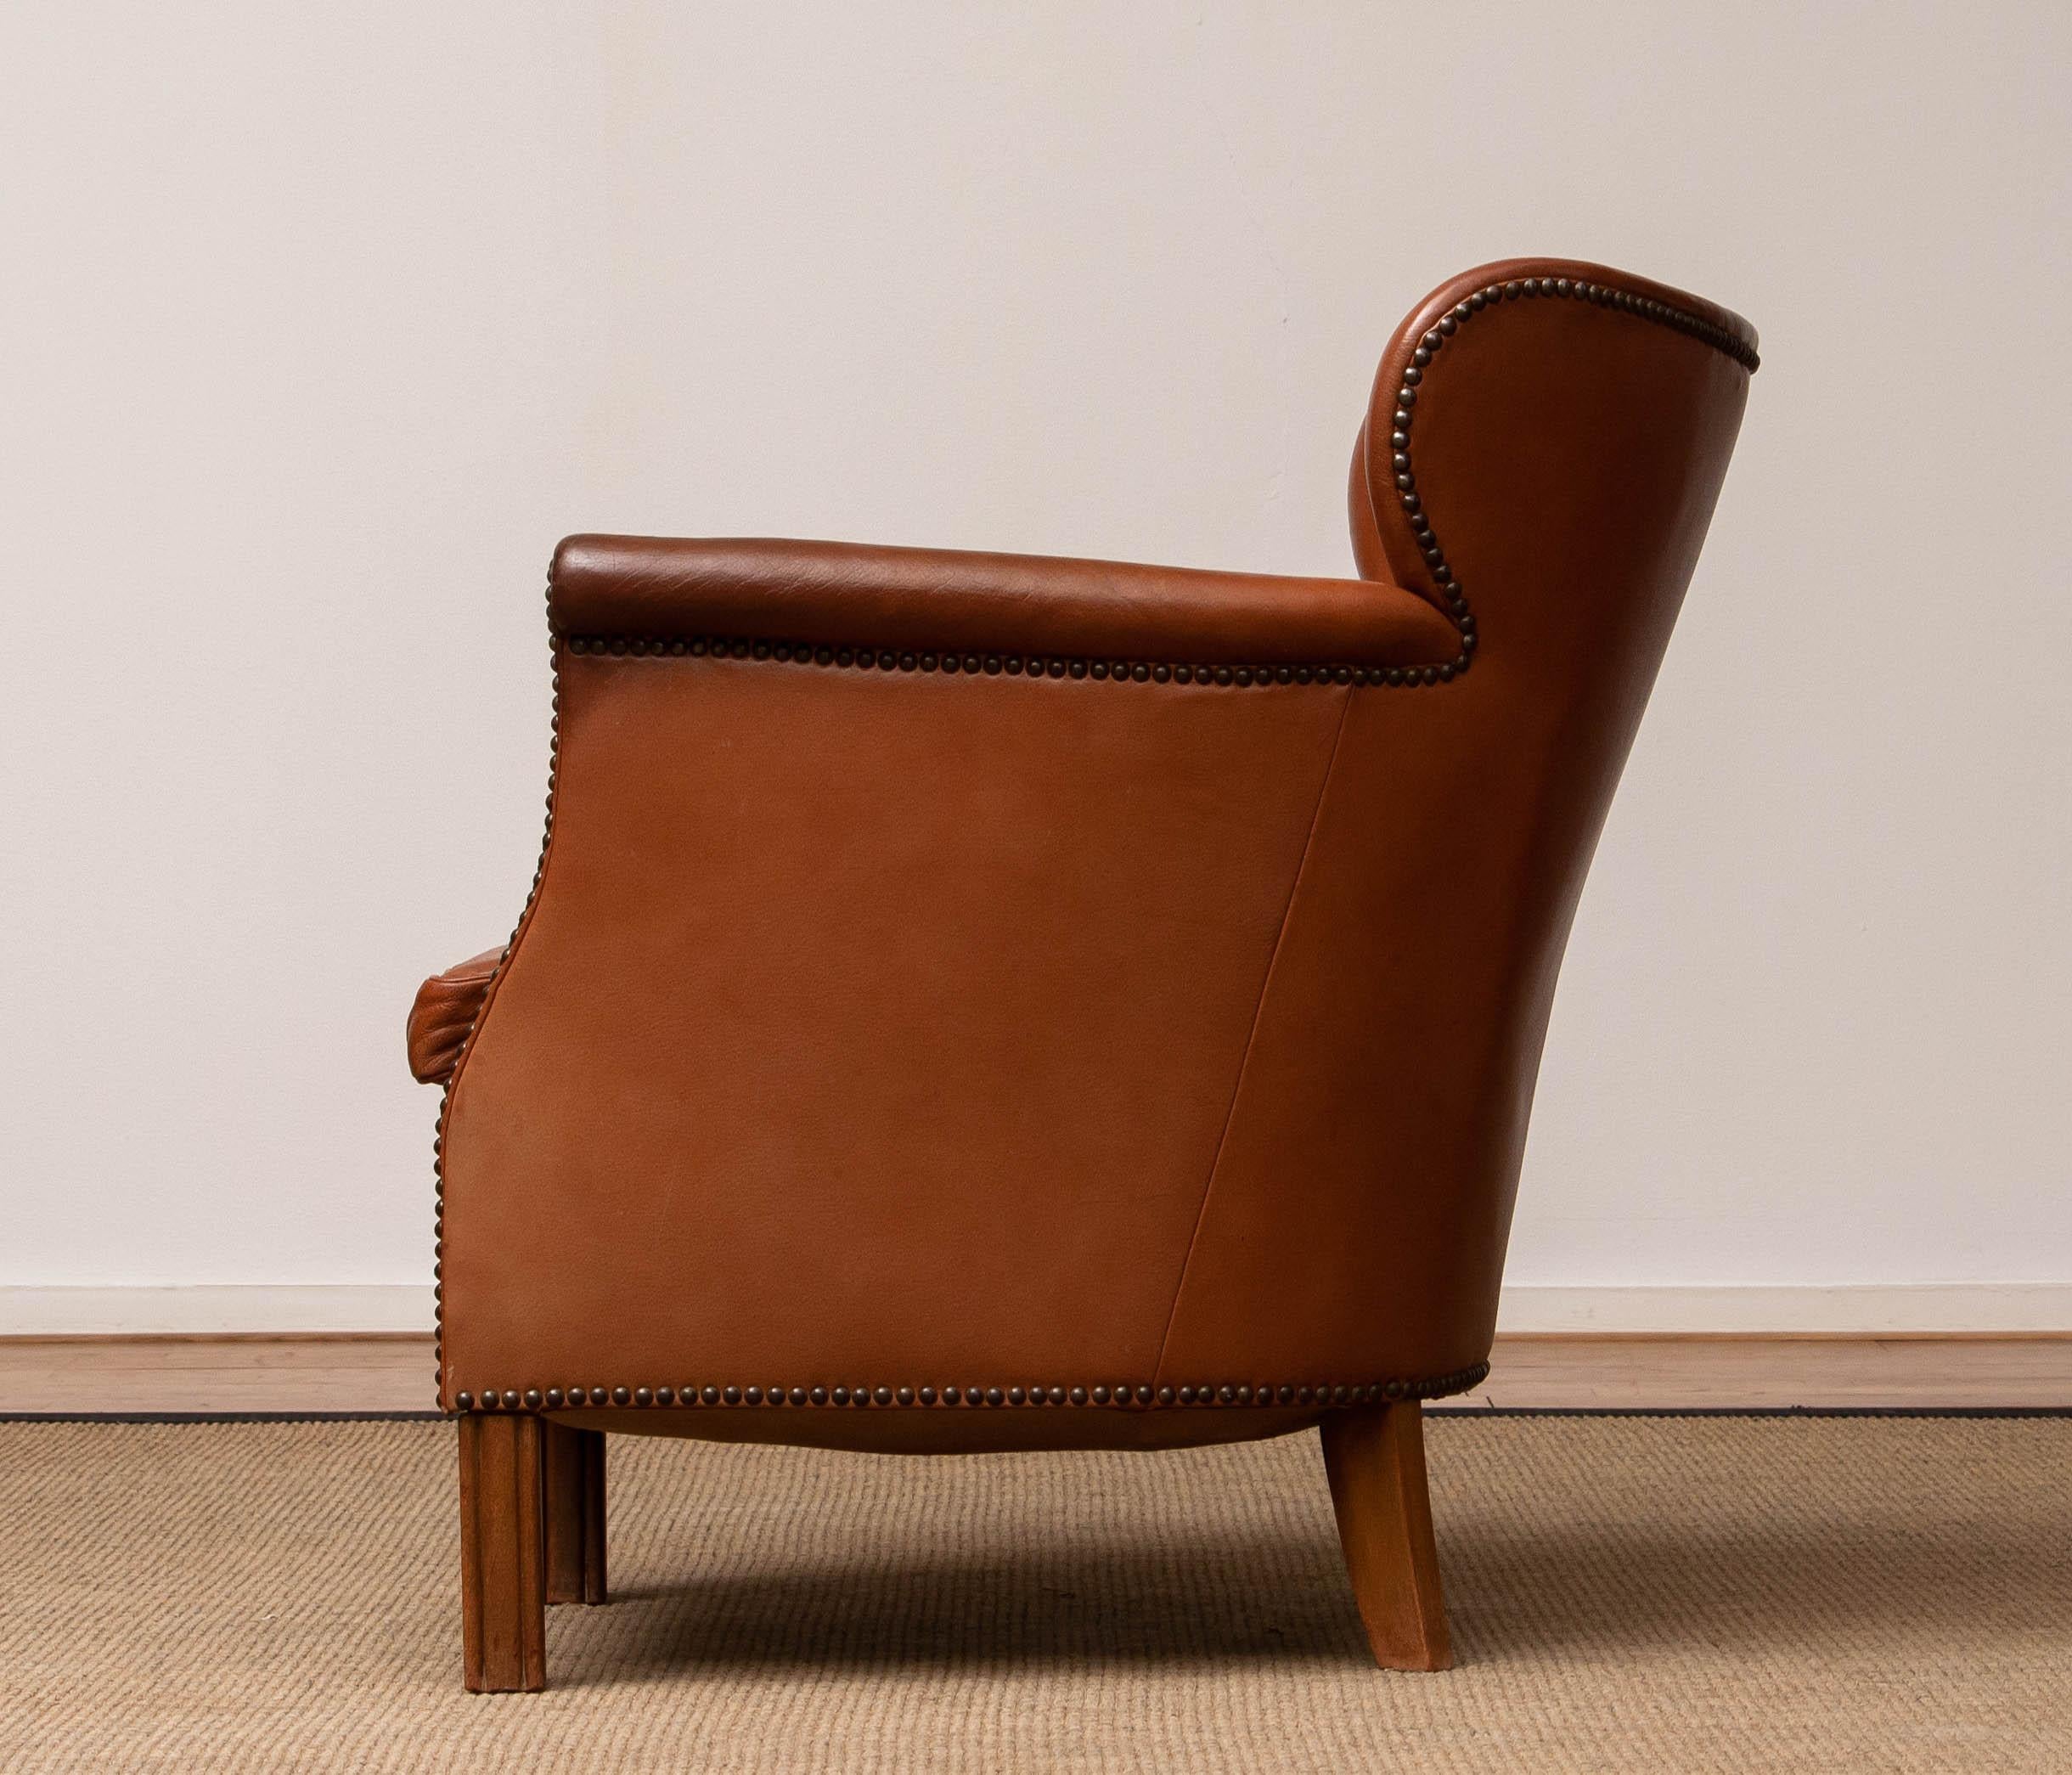 1940's Scandinavian Tan / Brown Nailed Leather Club / Cigar Chair from Denmark 3